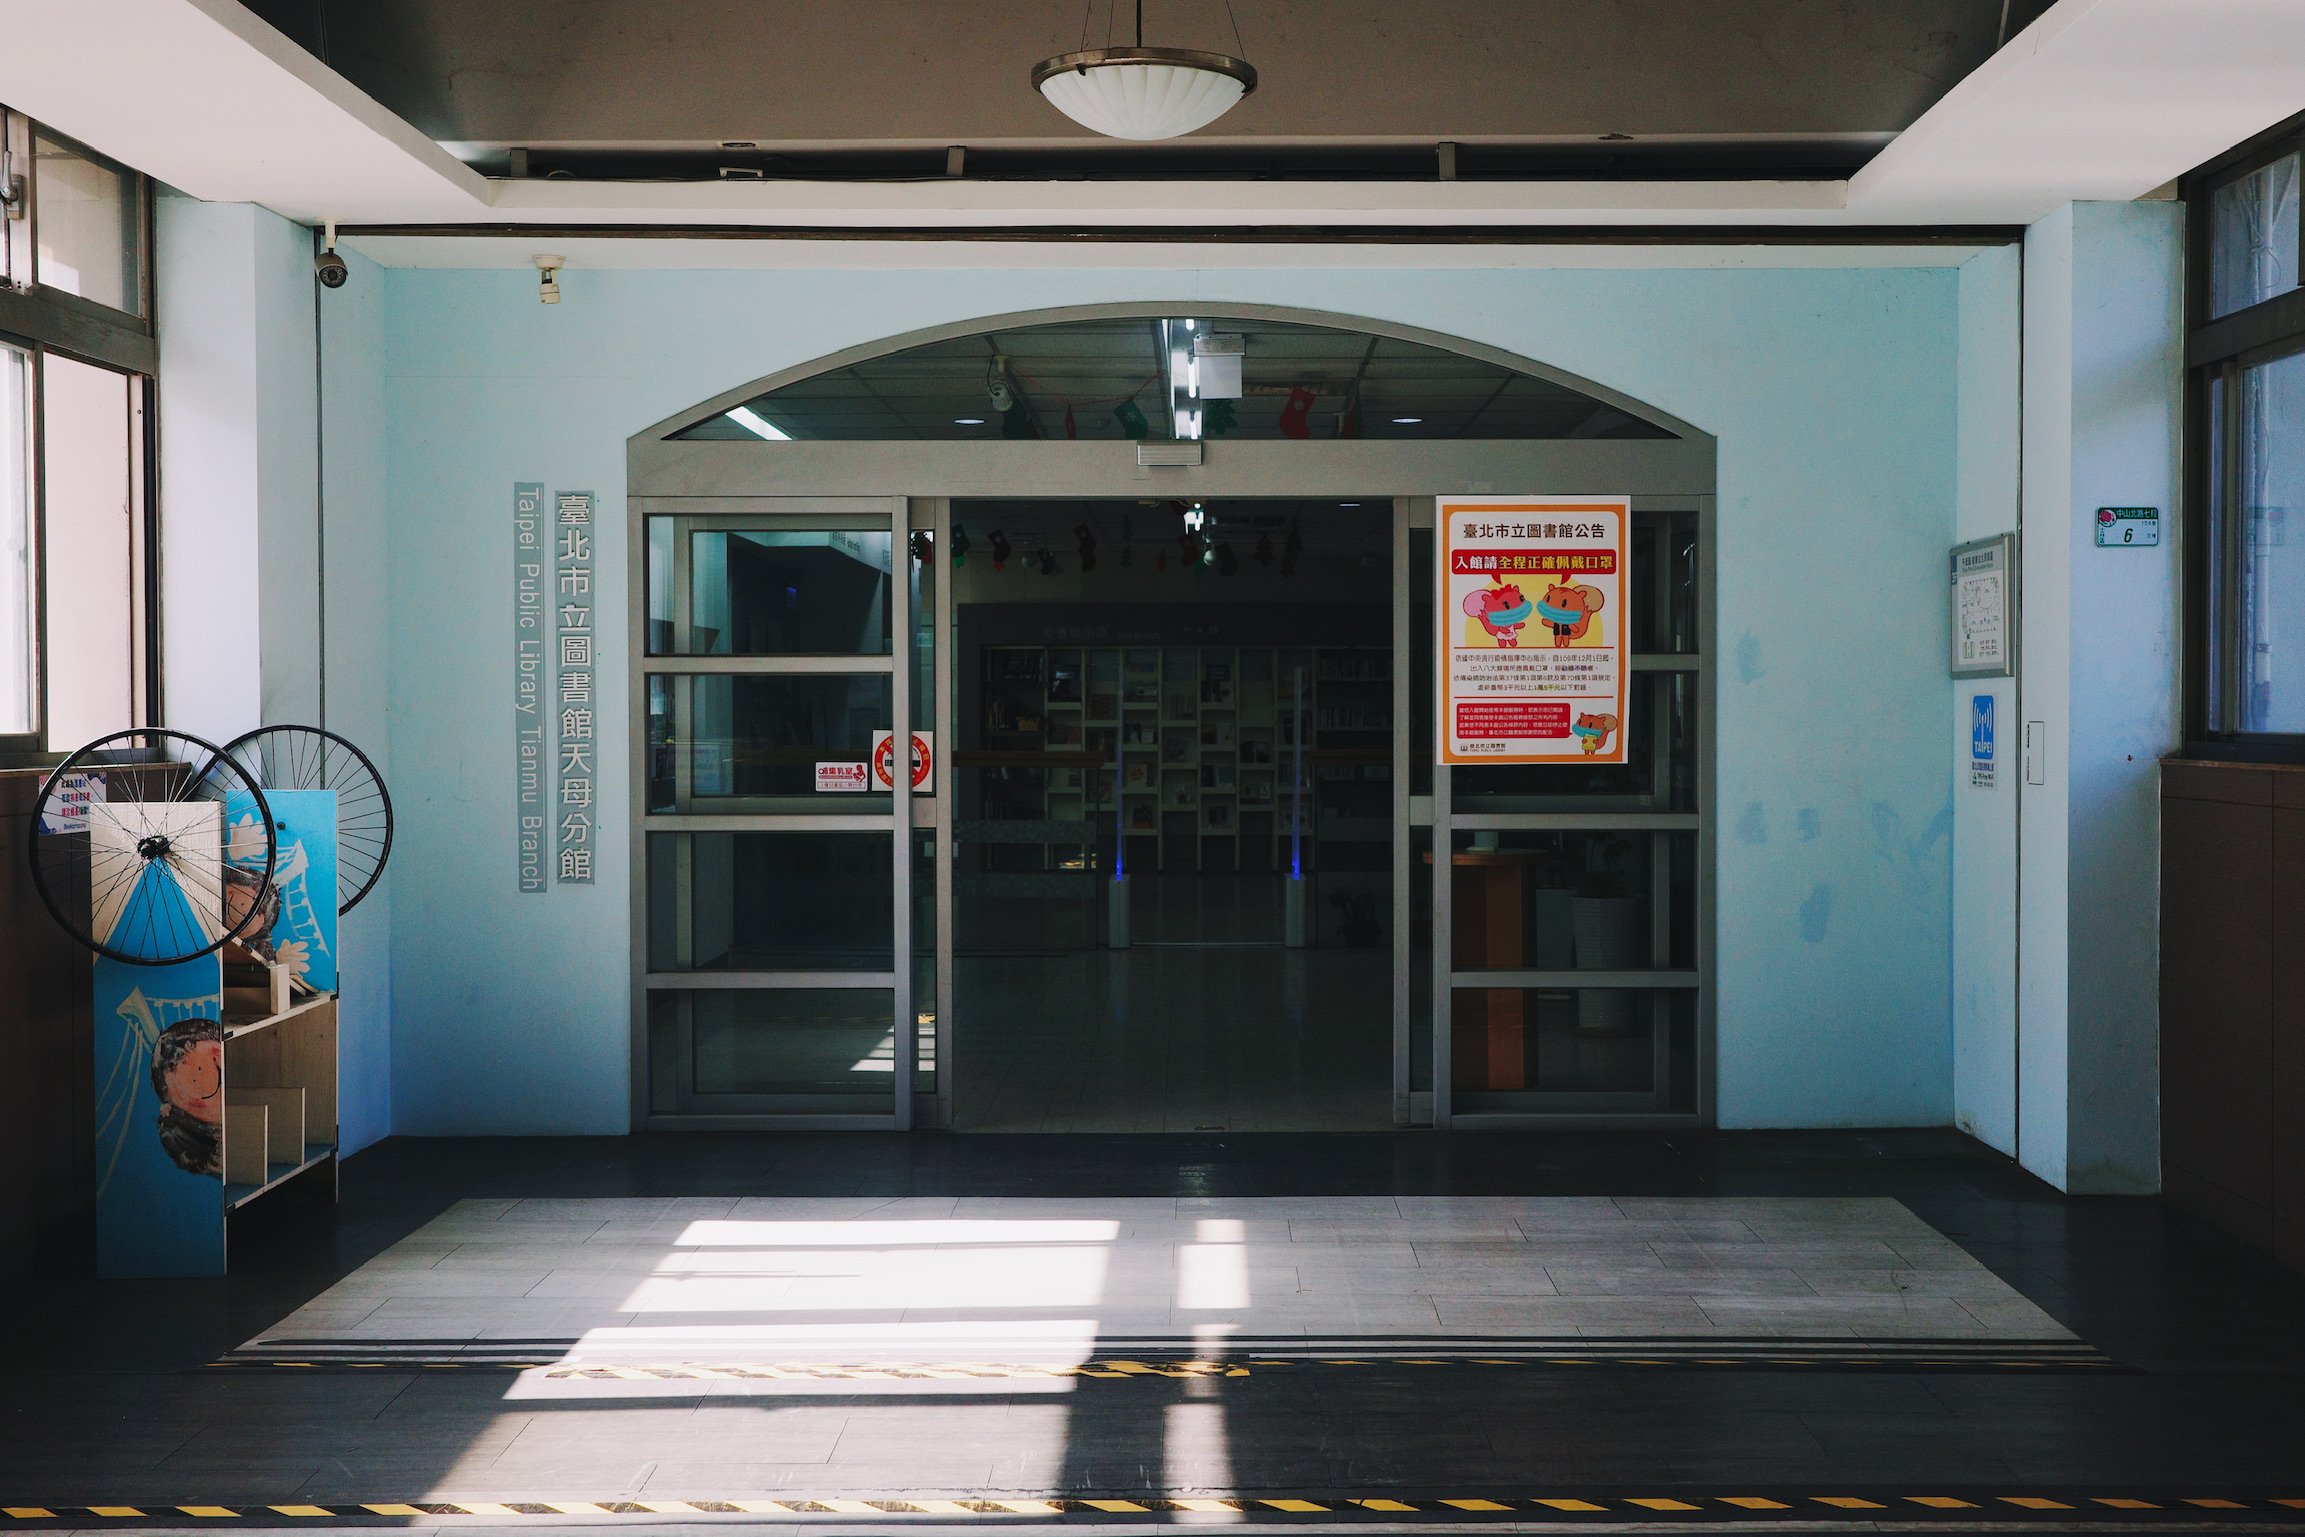 Entrance to a library with light blue walls and windows on both side and shadow on the floor.